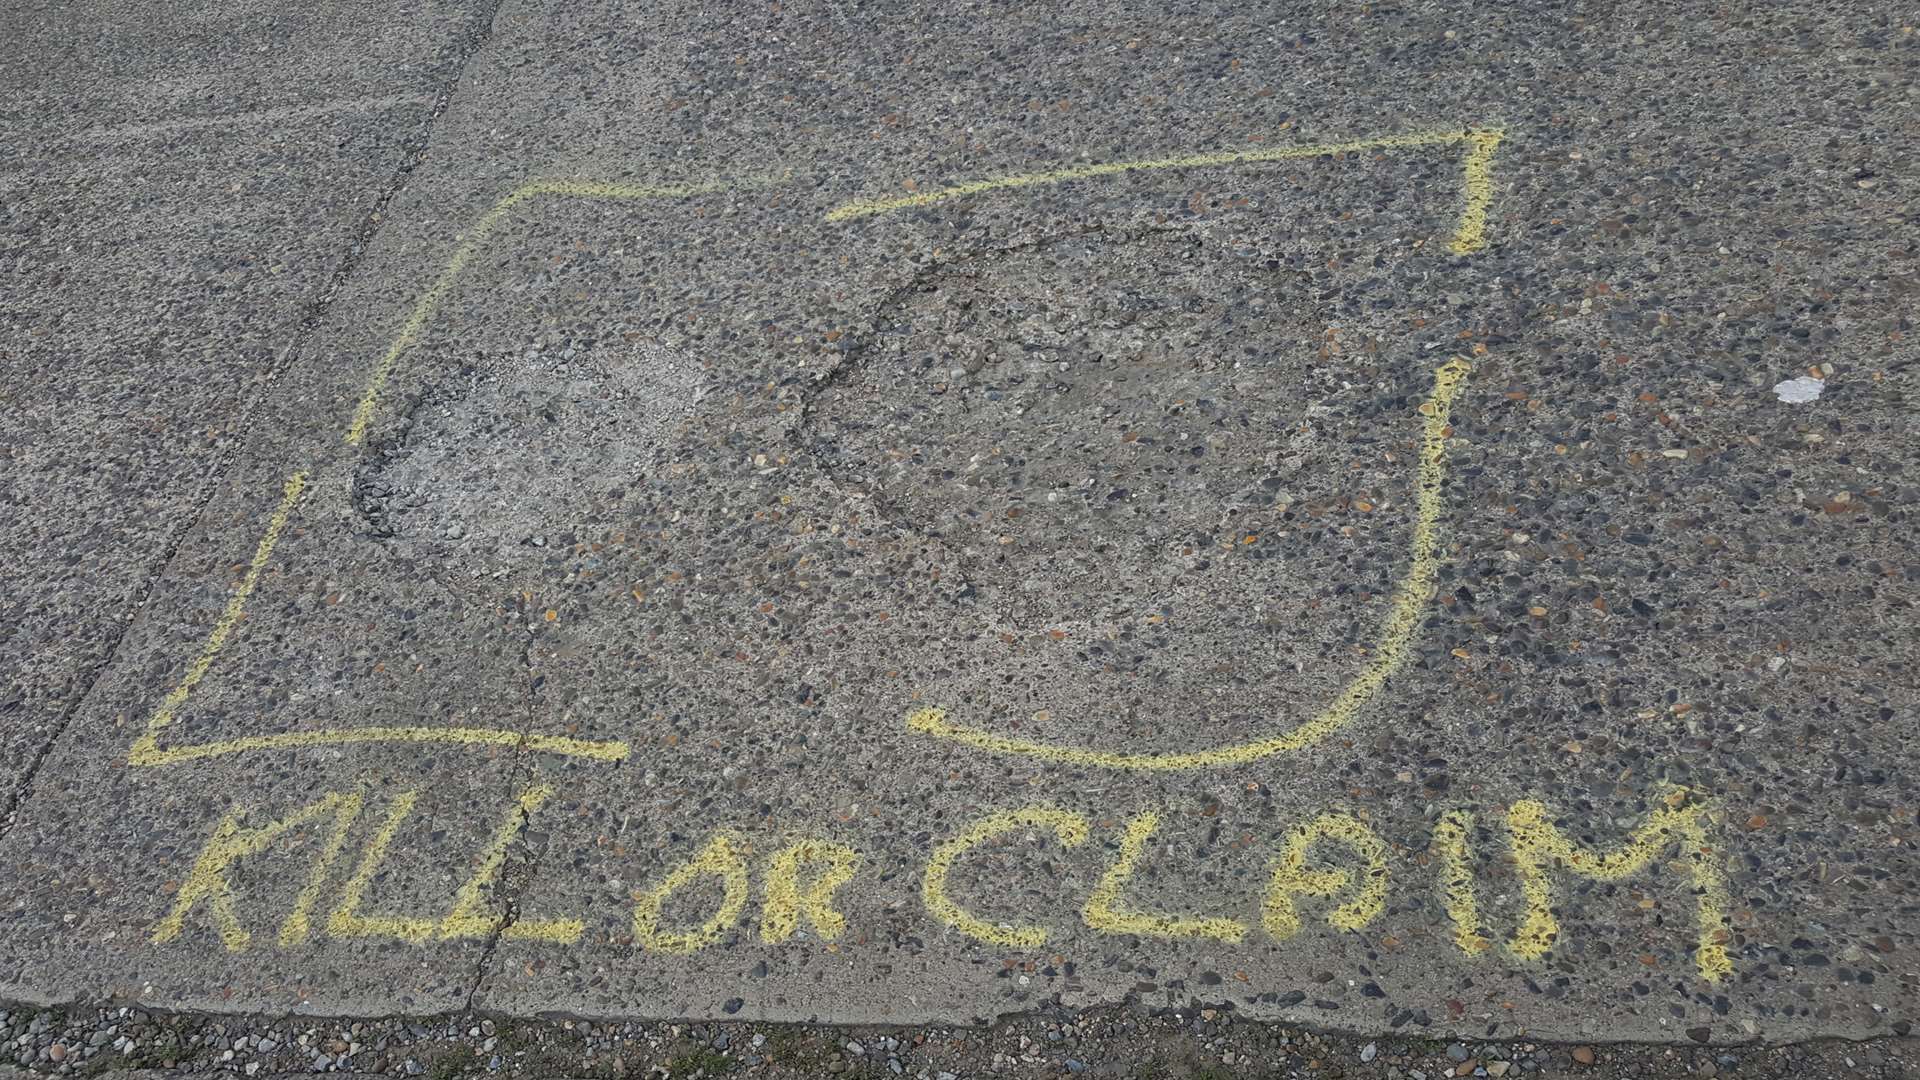 An angry resident has labelled potholes on the road with the words 'KILL OR CLAIM'